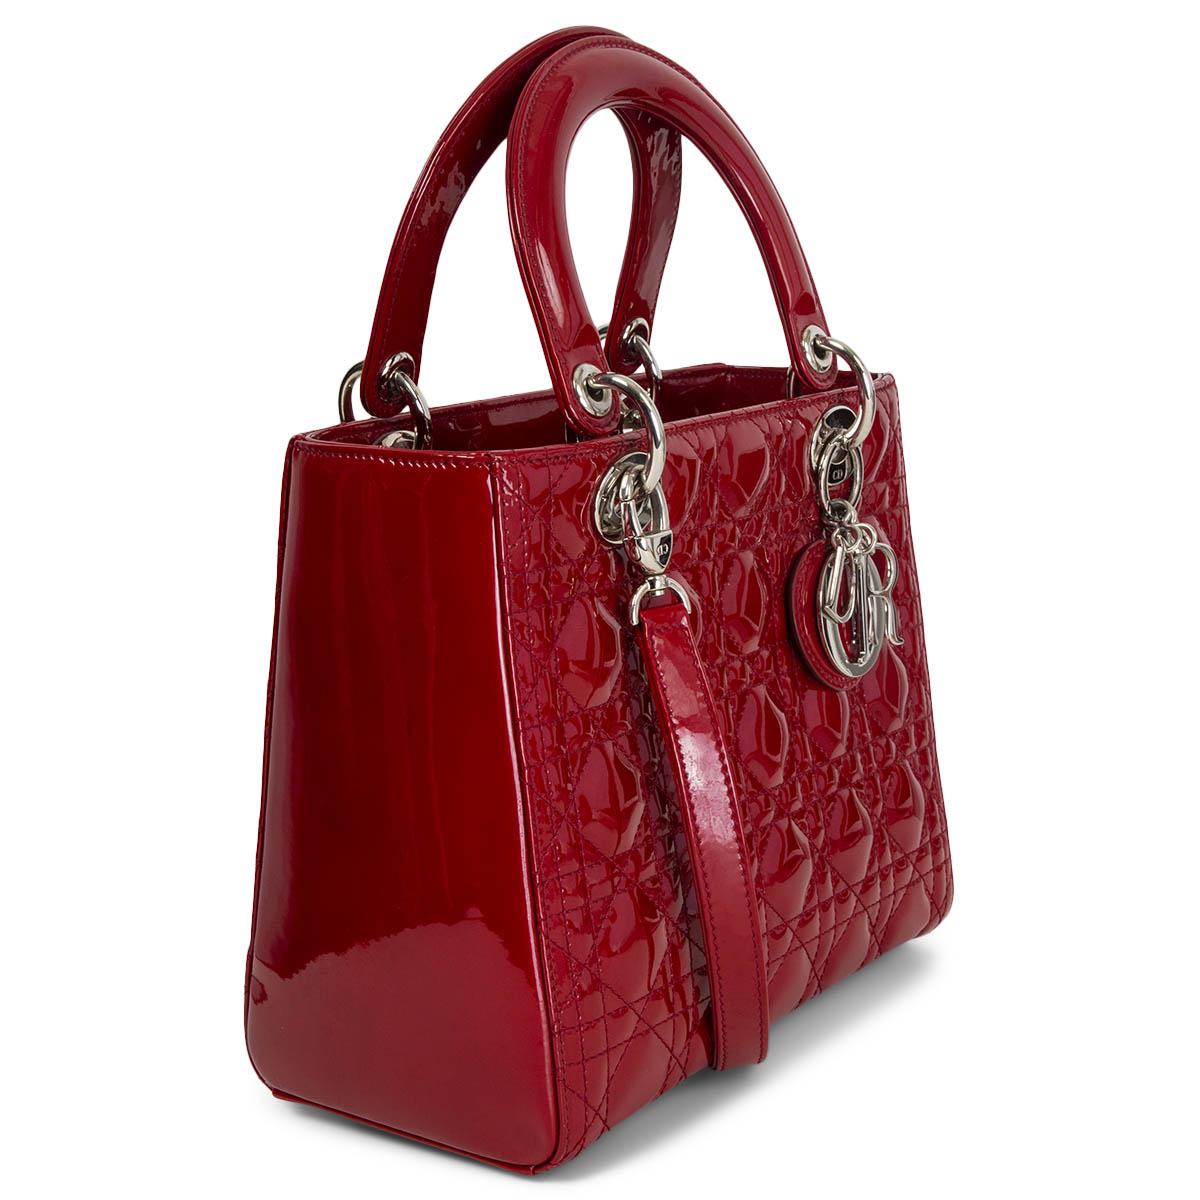 100% authentic Christian Dior Medium Lady Dior bag is crafted in burgundy red patent calfskin with signature Cannage stitching. Silver-finish metal hardware and the 'D.I.O.R.' charms complete and illuminate its silhouette. Featuring a thin,